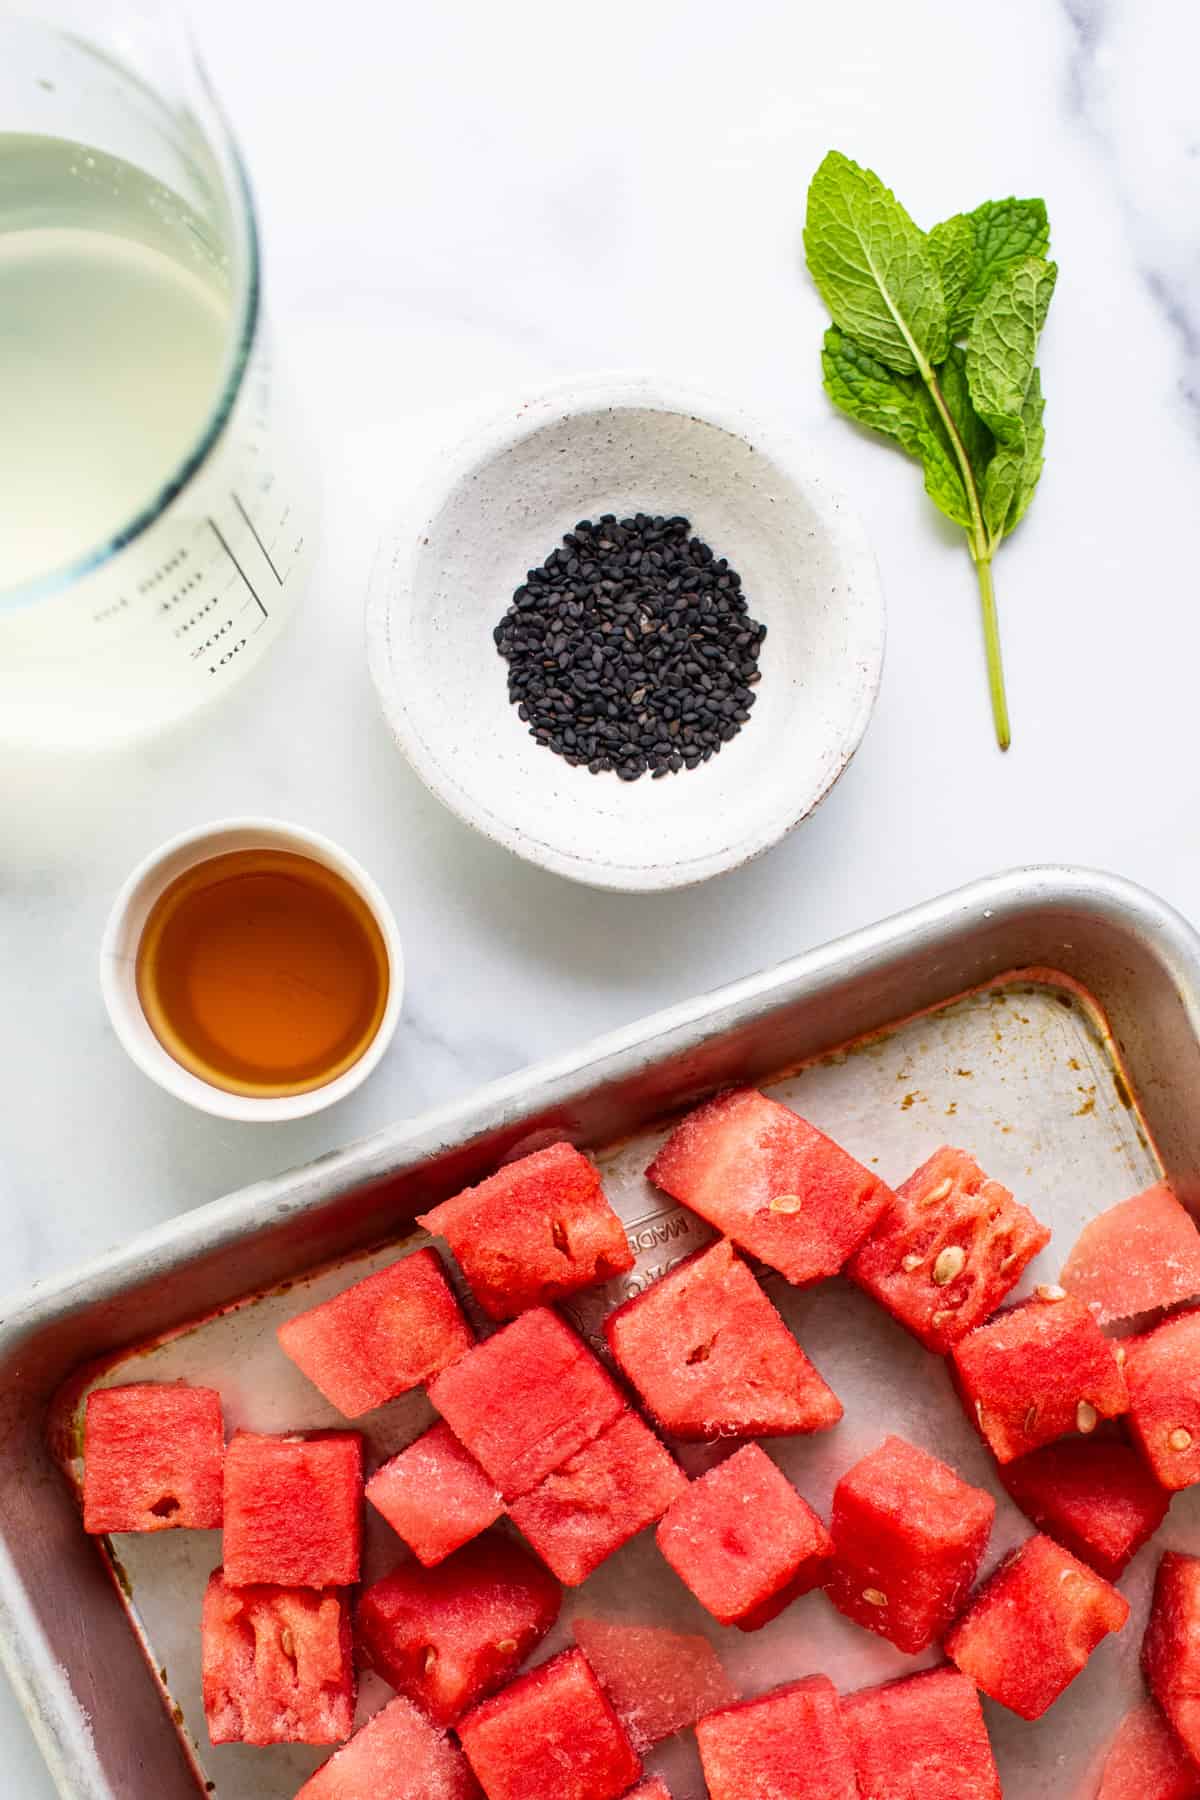 A tray of diced watermelon, a small bowl of black sesame seeds, a s، of mint, a container of ،ney, and a gl، of a pale beverage on a white surface.